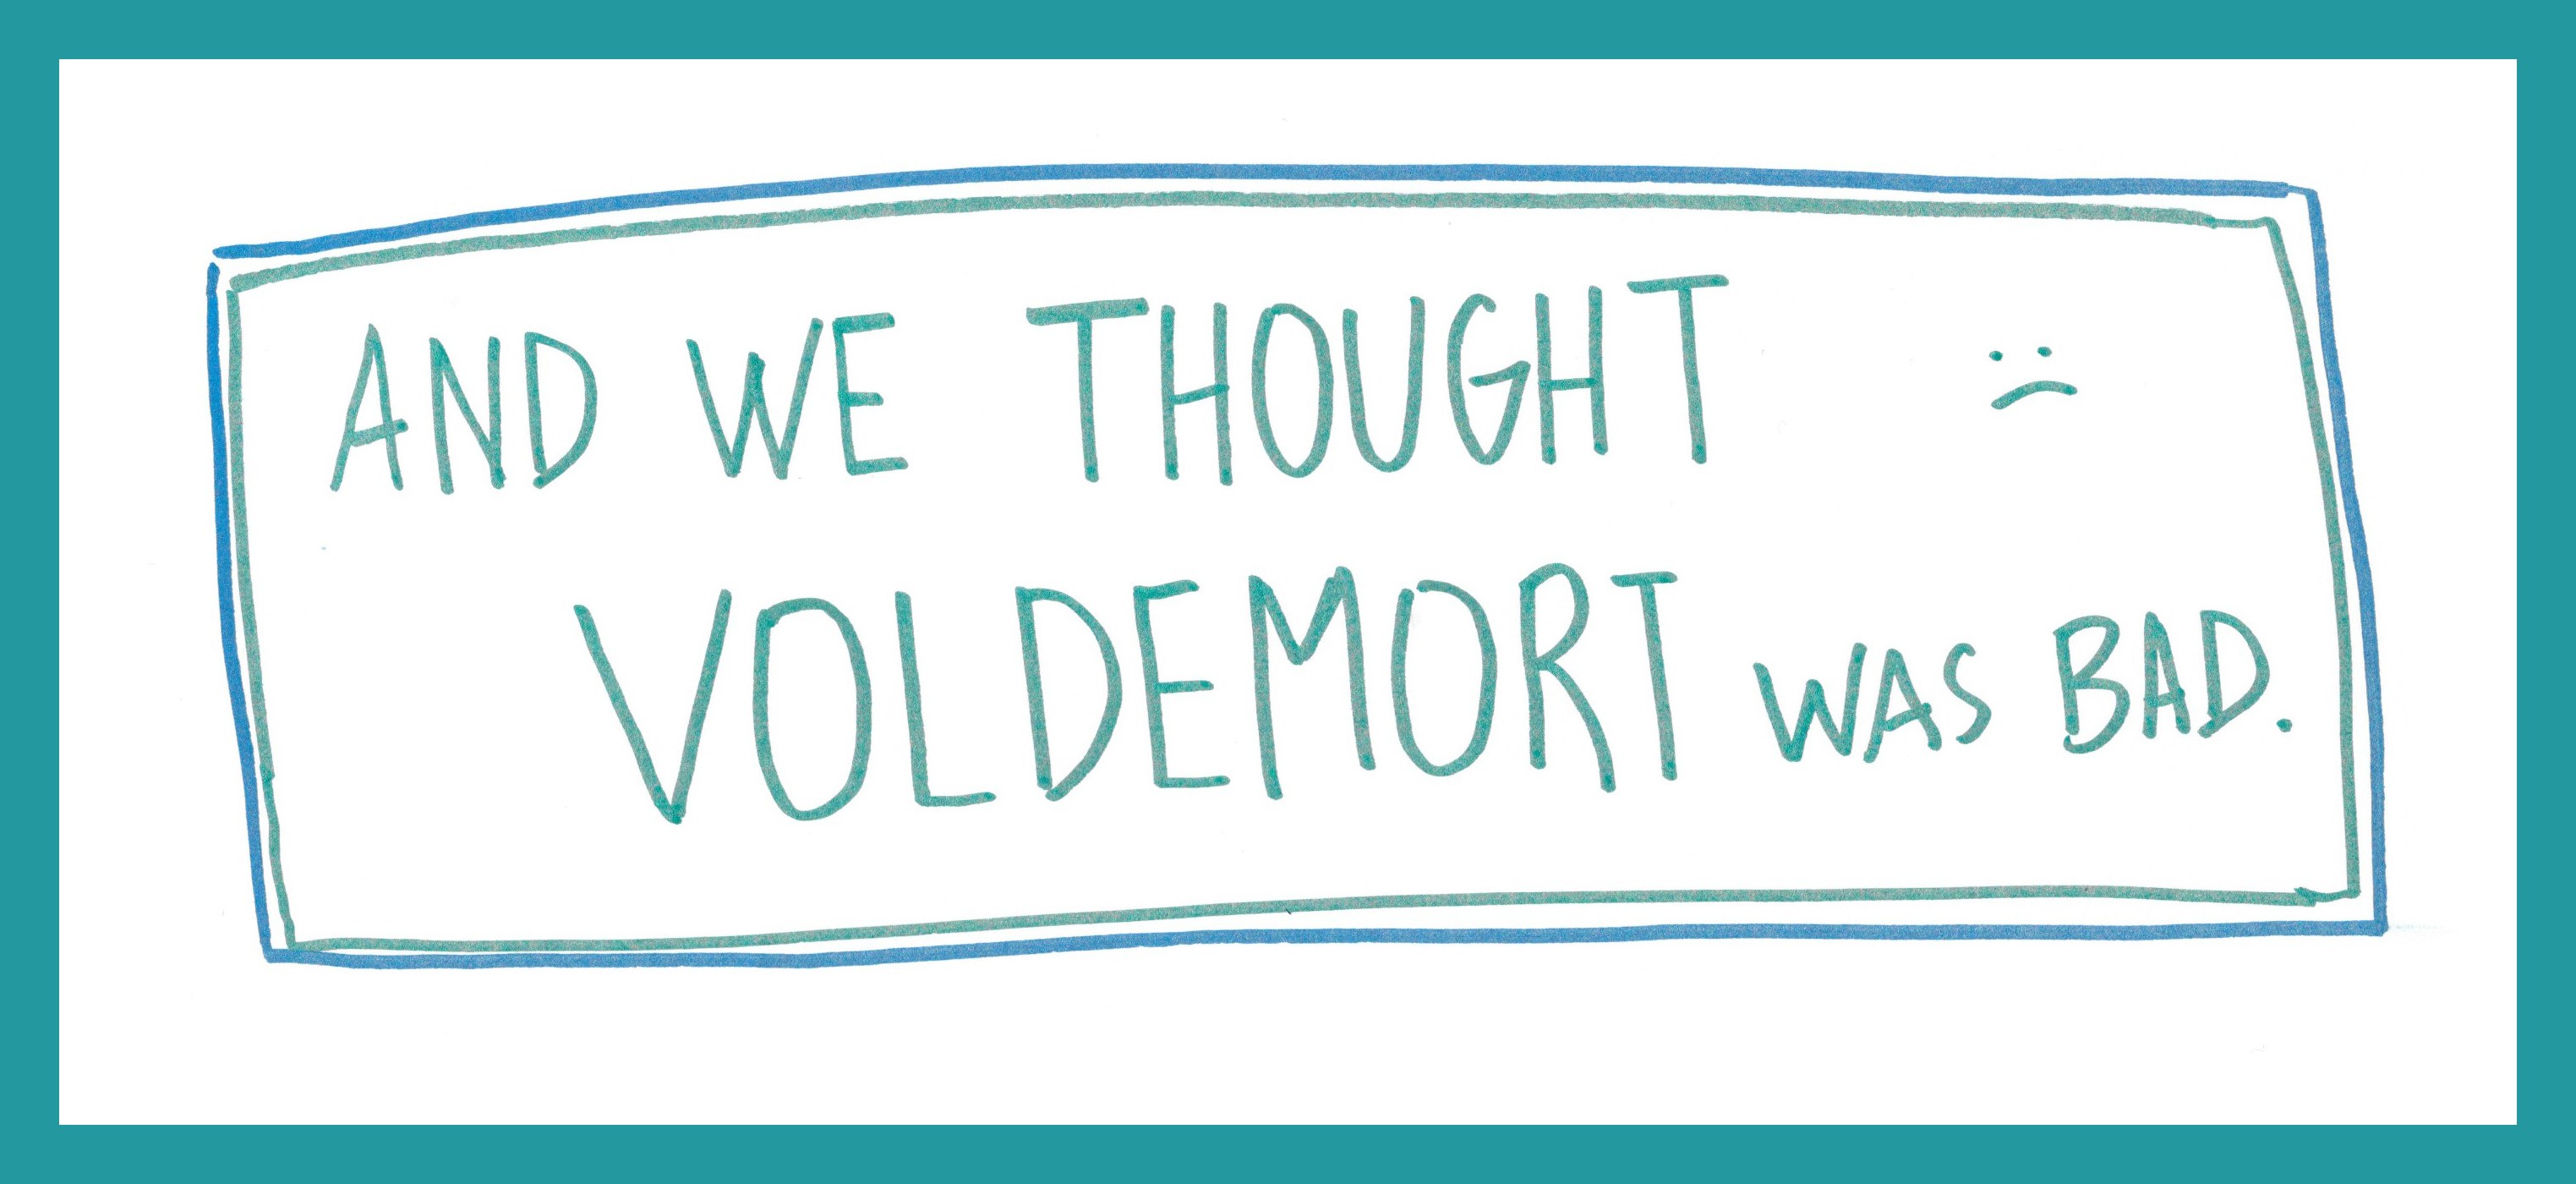 Get Our Your Wand